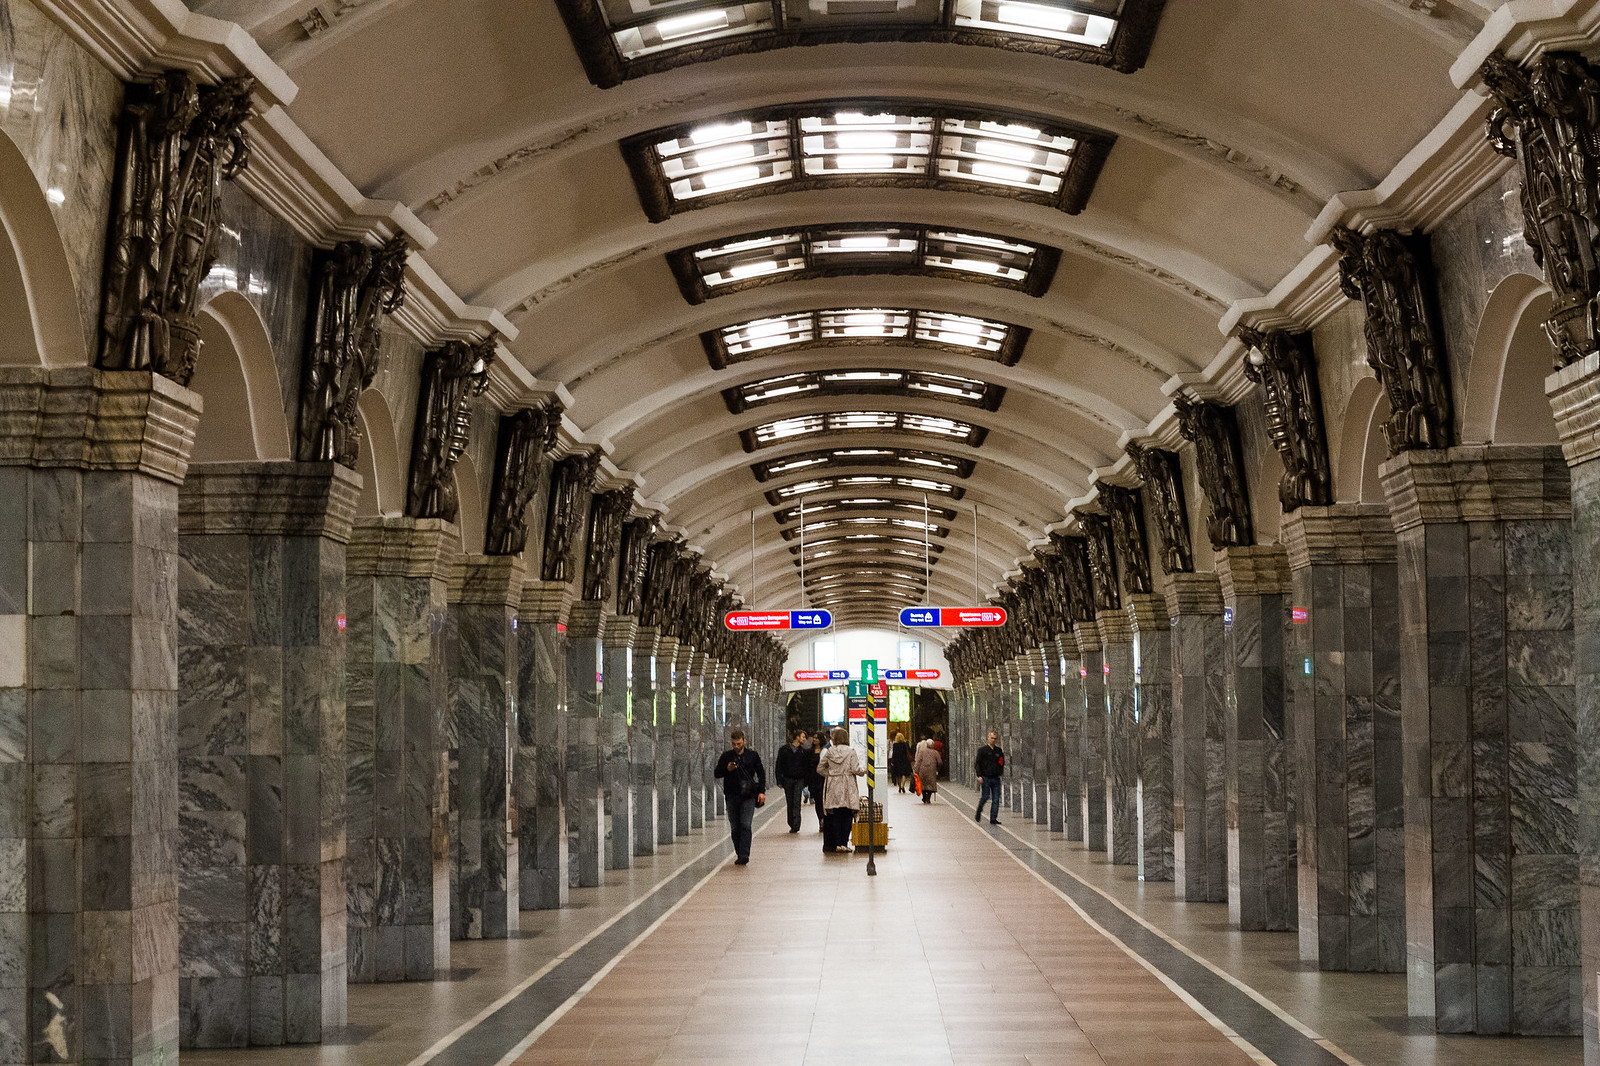 The St Petersburg Metro is one of the most beautiful underground railway systems we have ever encountered. First opened in 1955, the metro of Saint Petersburg, Russia is one of the busiest in the world with five subway lines, 67 stations, over 3.000 trains and 2.5 million passengers a day.